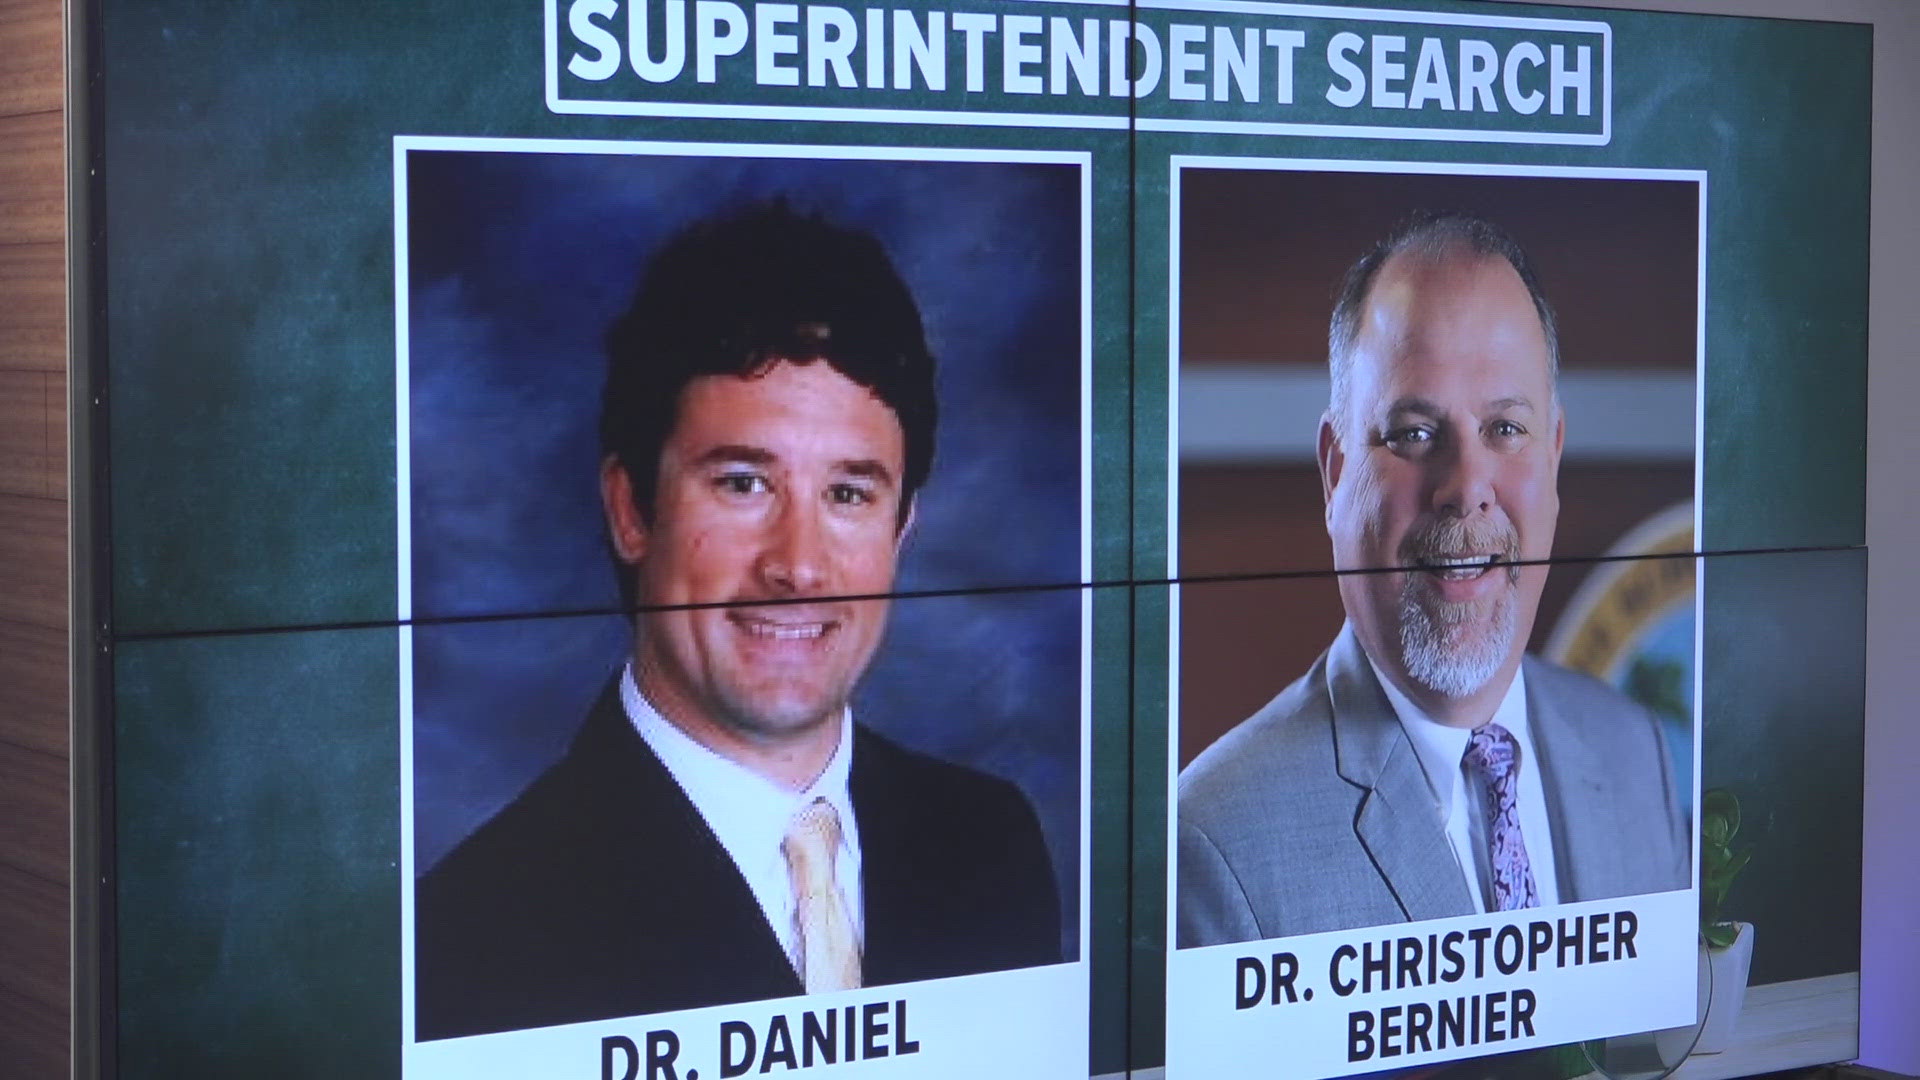 Dr. Daniel Smith and Dr. Christopher Bernier are the final two choices.